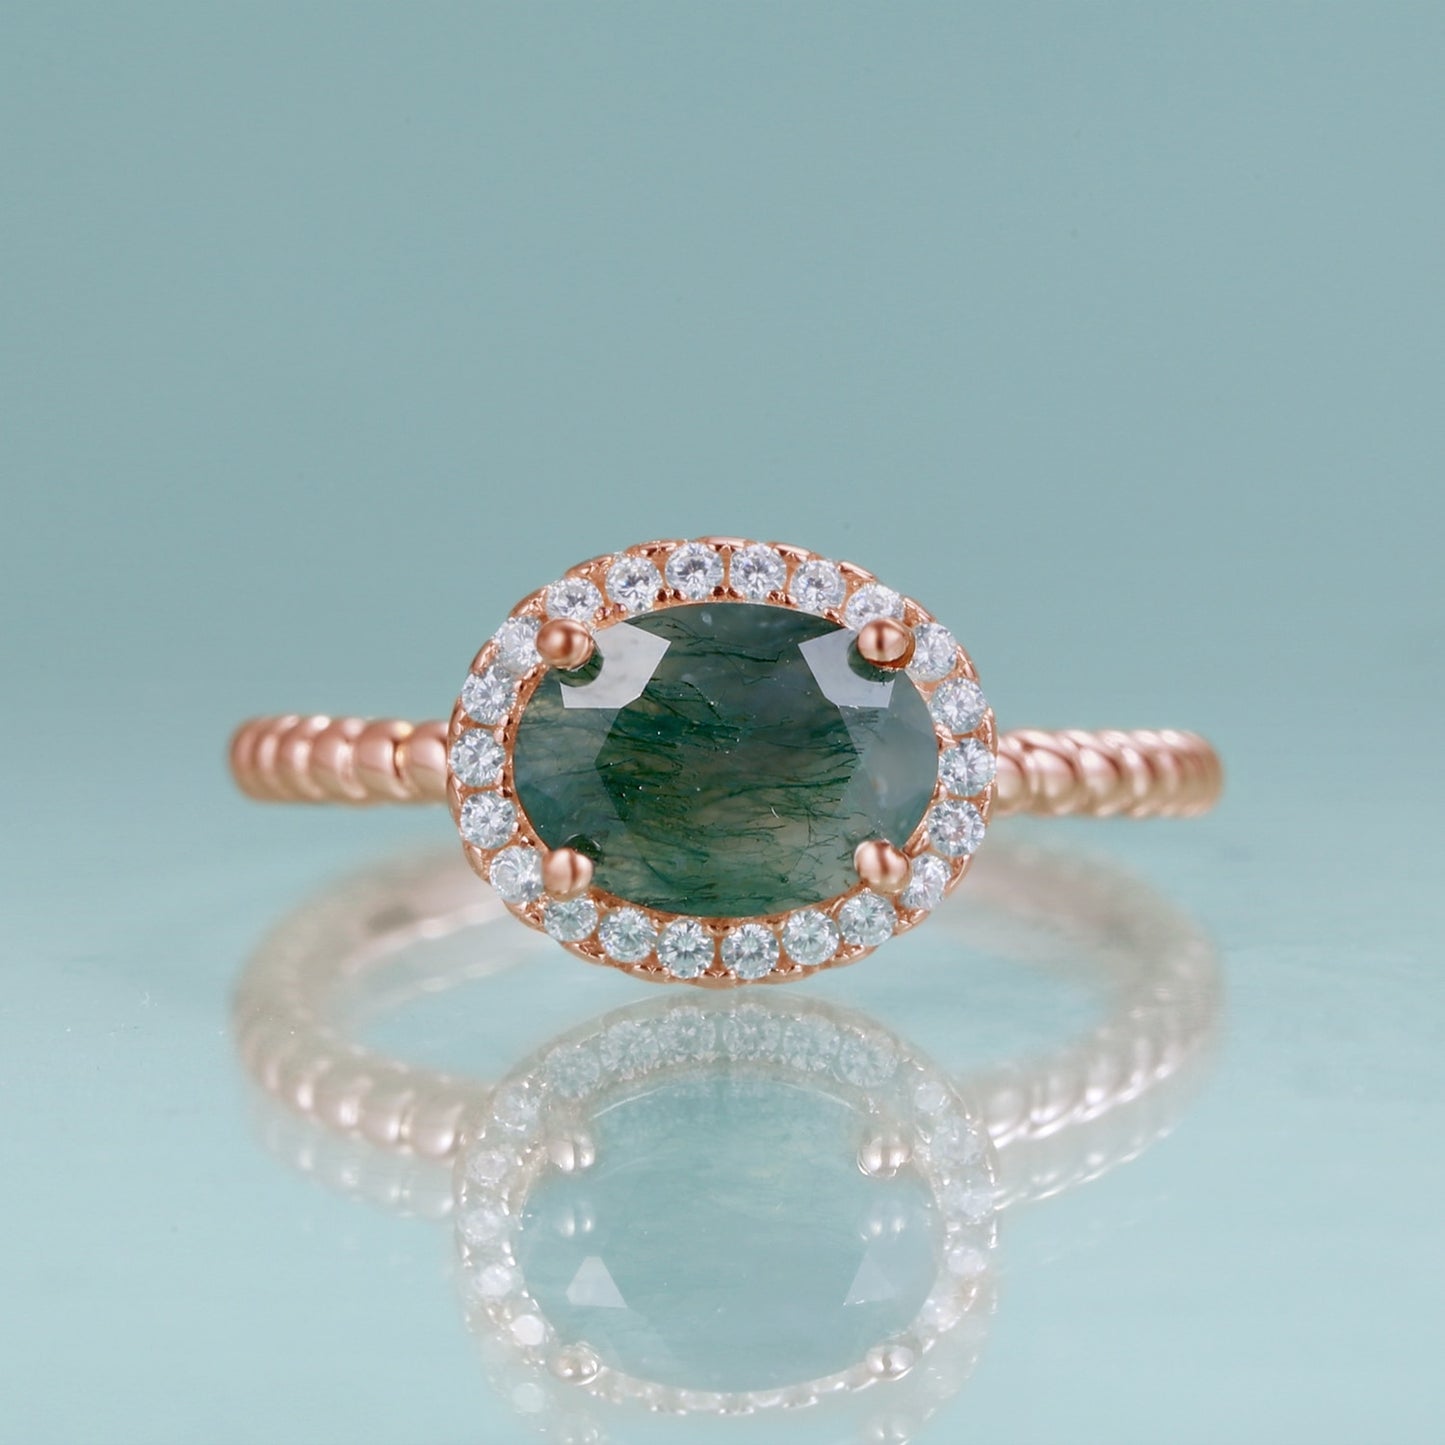 GEM&#39;S BALLET 1.3CT Oval Cut Moss Agate Gemstone Engagement Rings in 925 Sterling Silver Handmade Stripes Ring Gift For Her Moss Agate-R|925 Sterling Silver